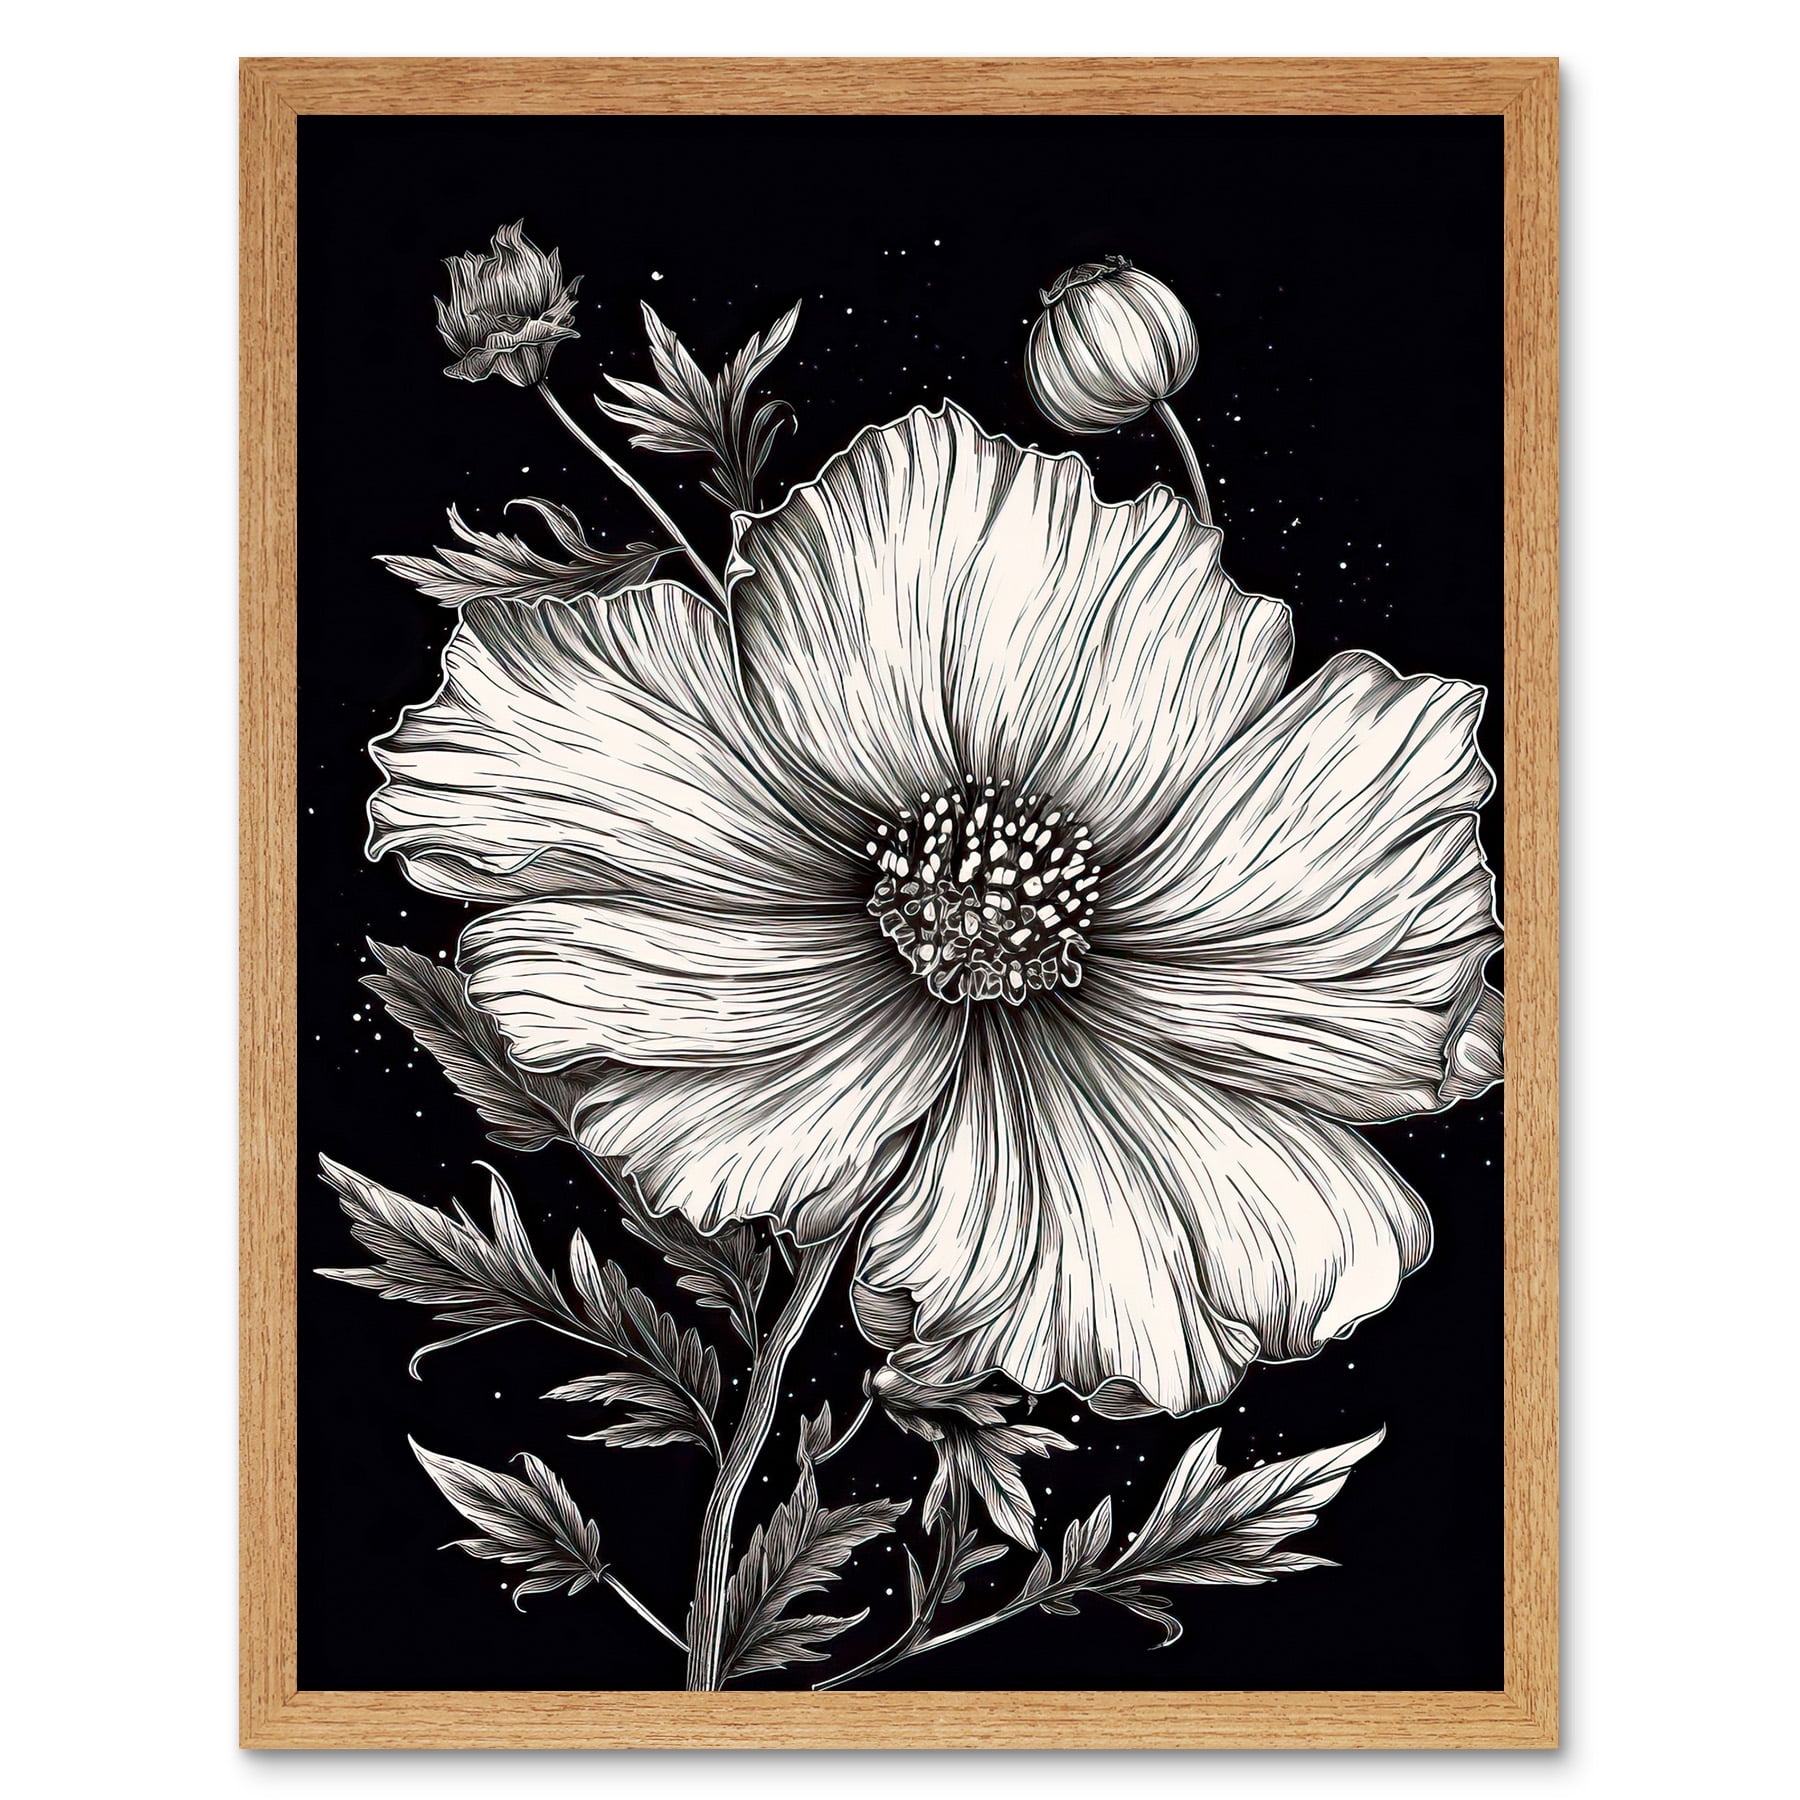 Decor Flower Sky Cosmos Art and Night 12x16 and White Print Black inch Starry Wall Poster Framed